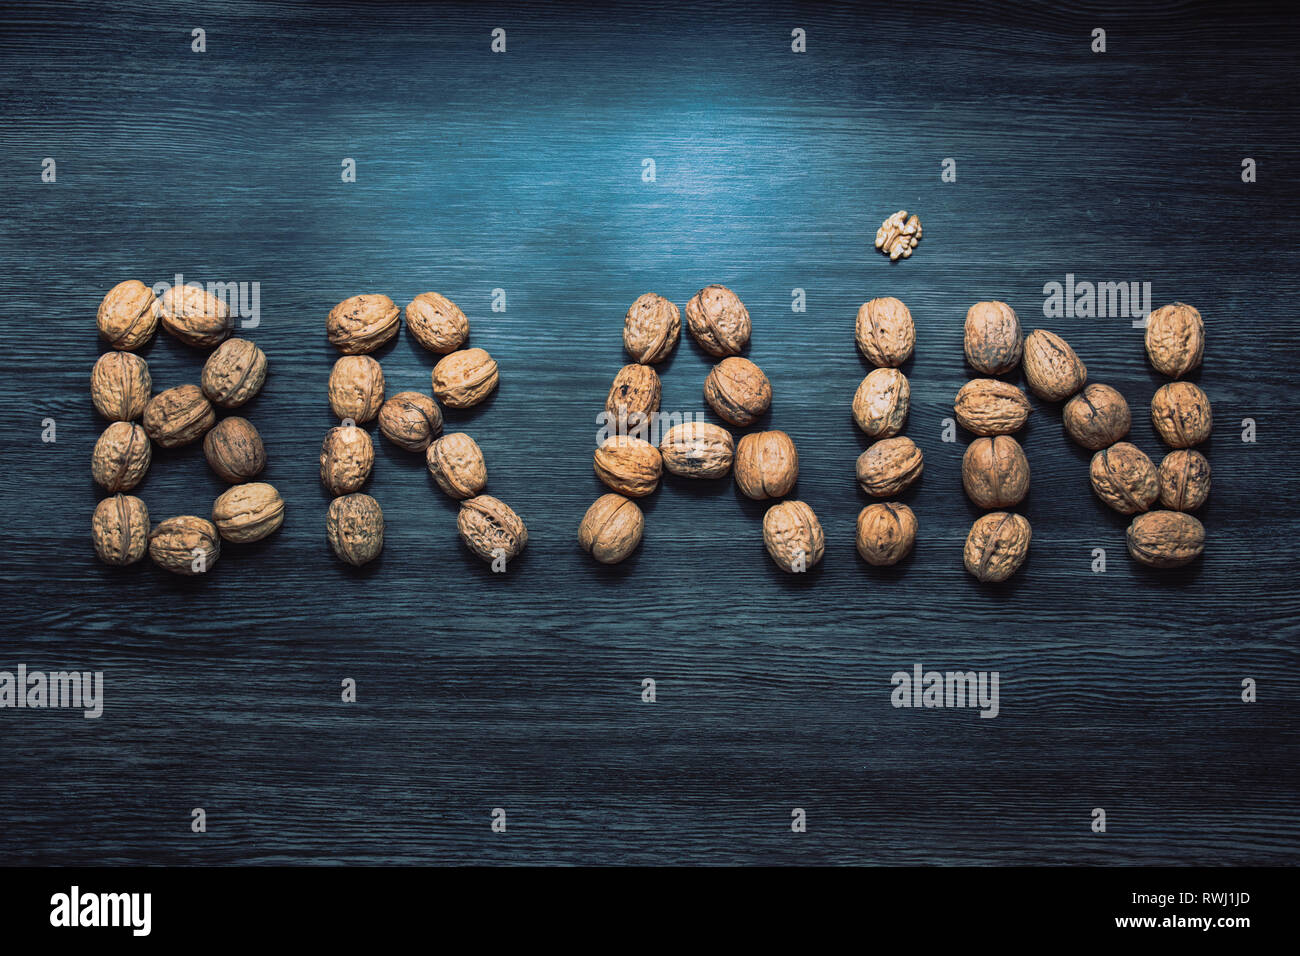 Brain letters sign made with walnuts against blue background. Brain health concept nutrition Stock Photo